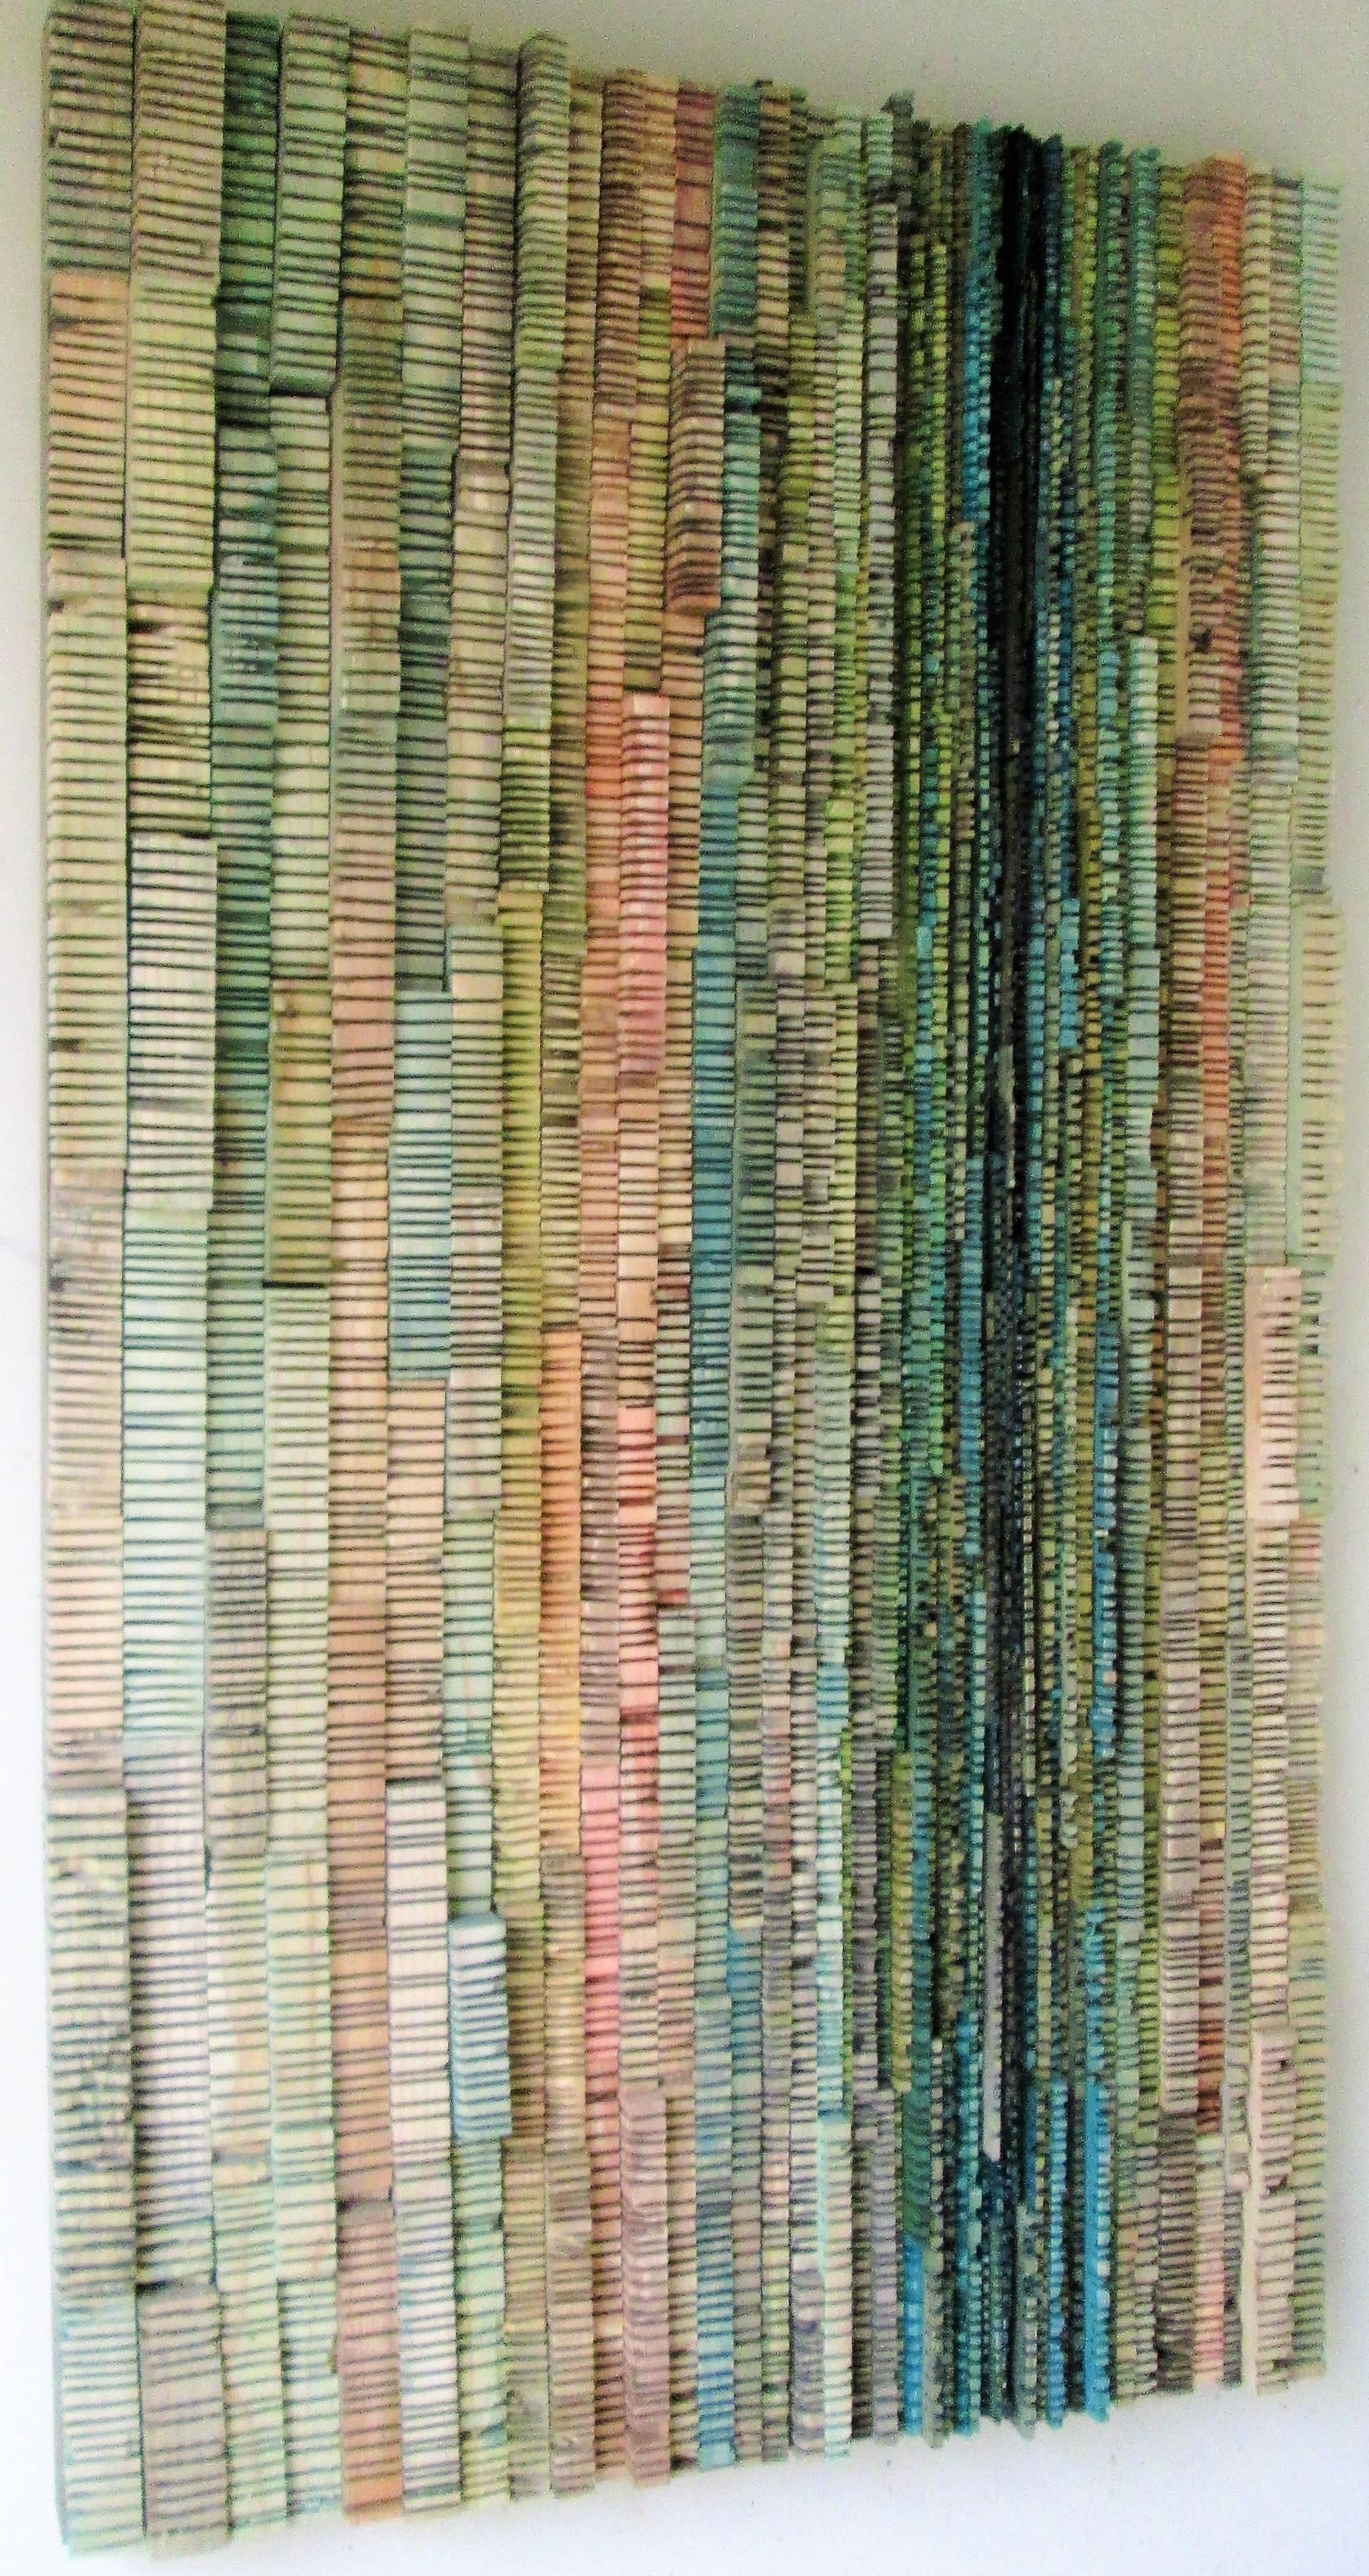 Stephen Walling Abstract Sculpture - Tapestry / Striations: Abstract Carved Wood Wall Sculpture in Rose, Teal & Green